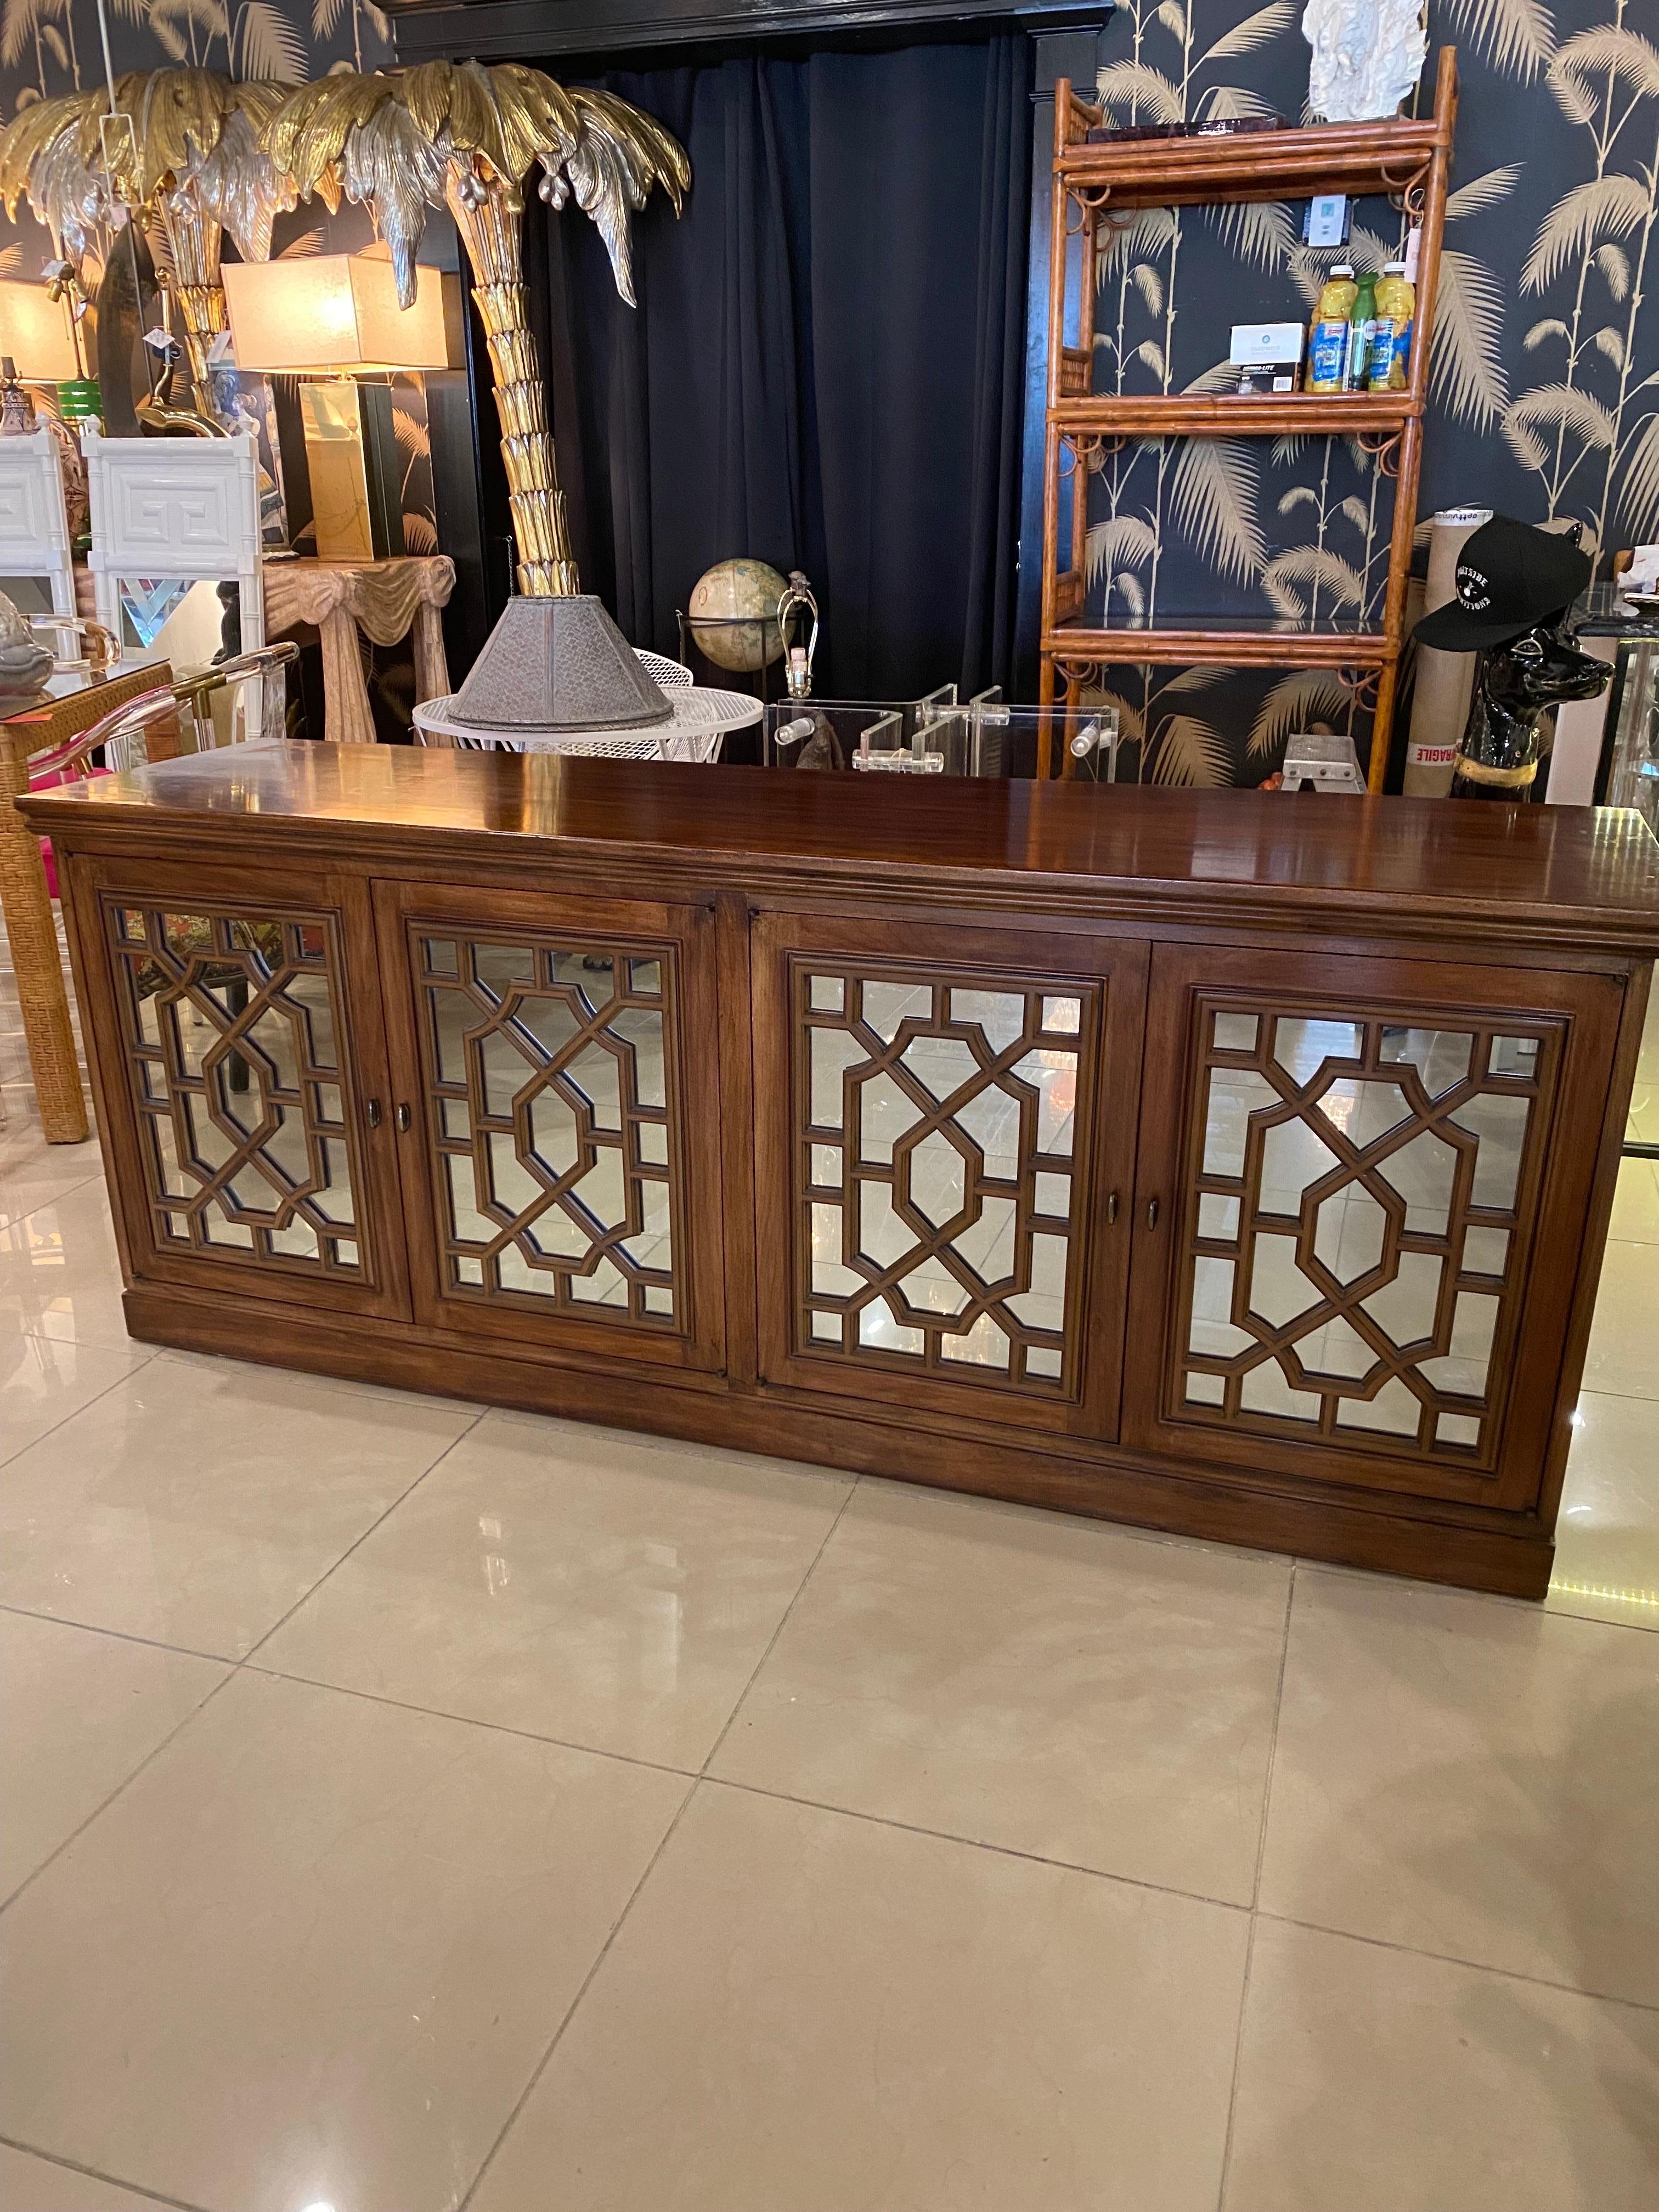 Vintage Wood Chinoiserie Fretwork Fret Mirrored Credenza Buffet Sideboard Doors For Sale 5